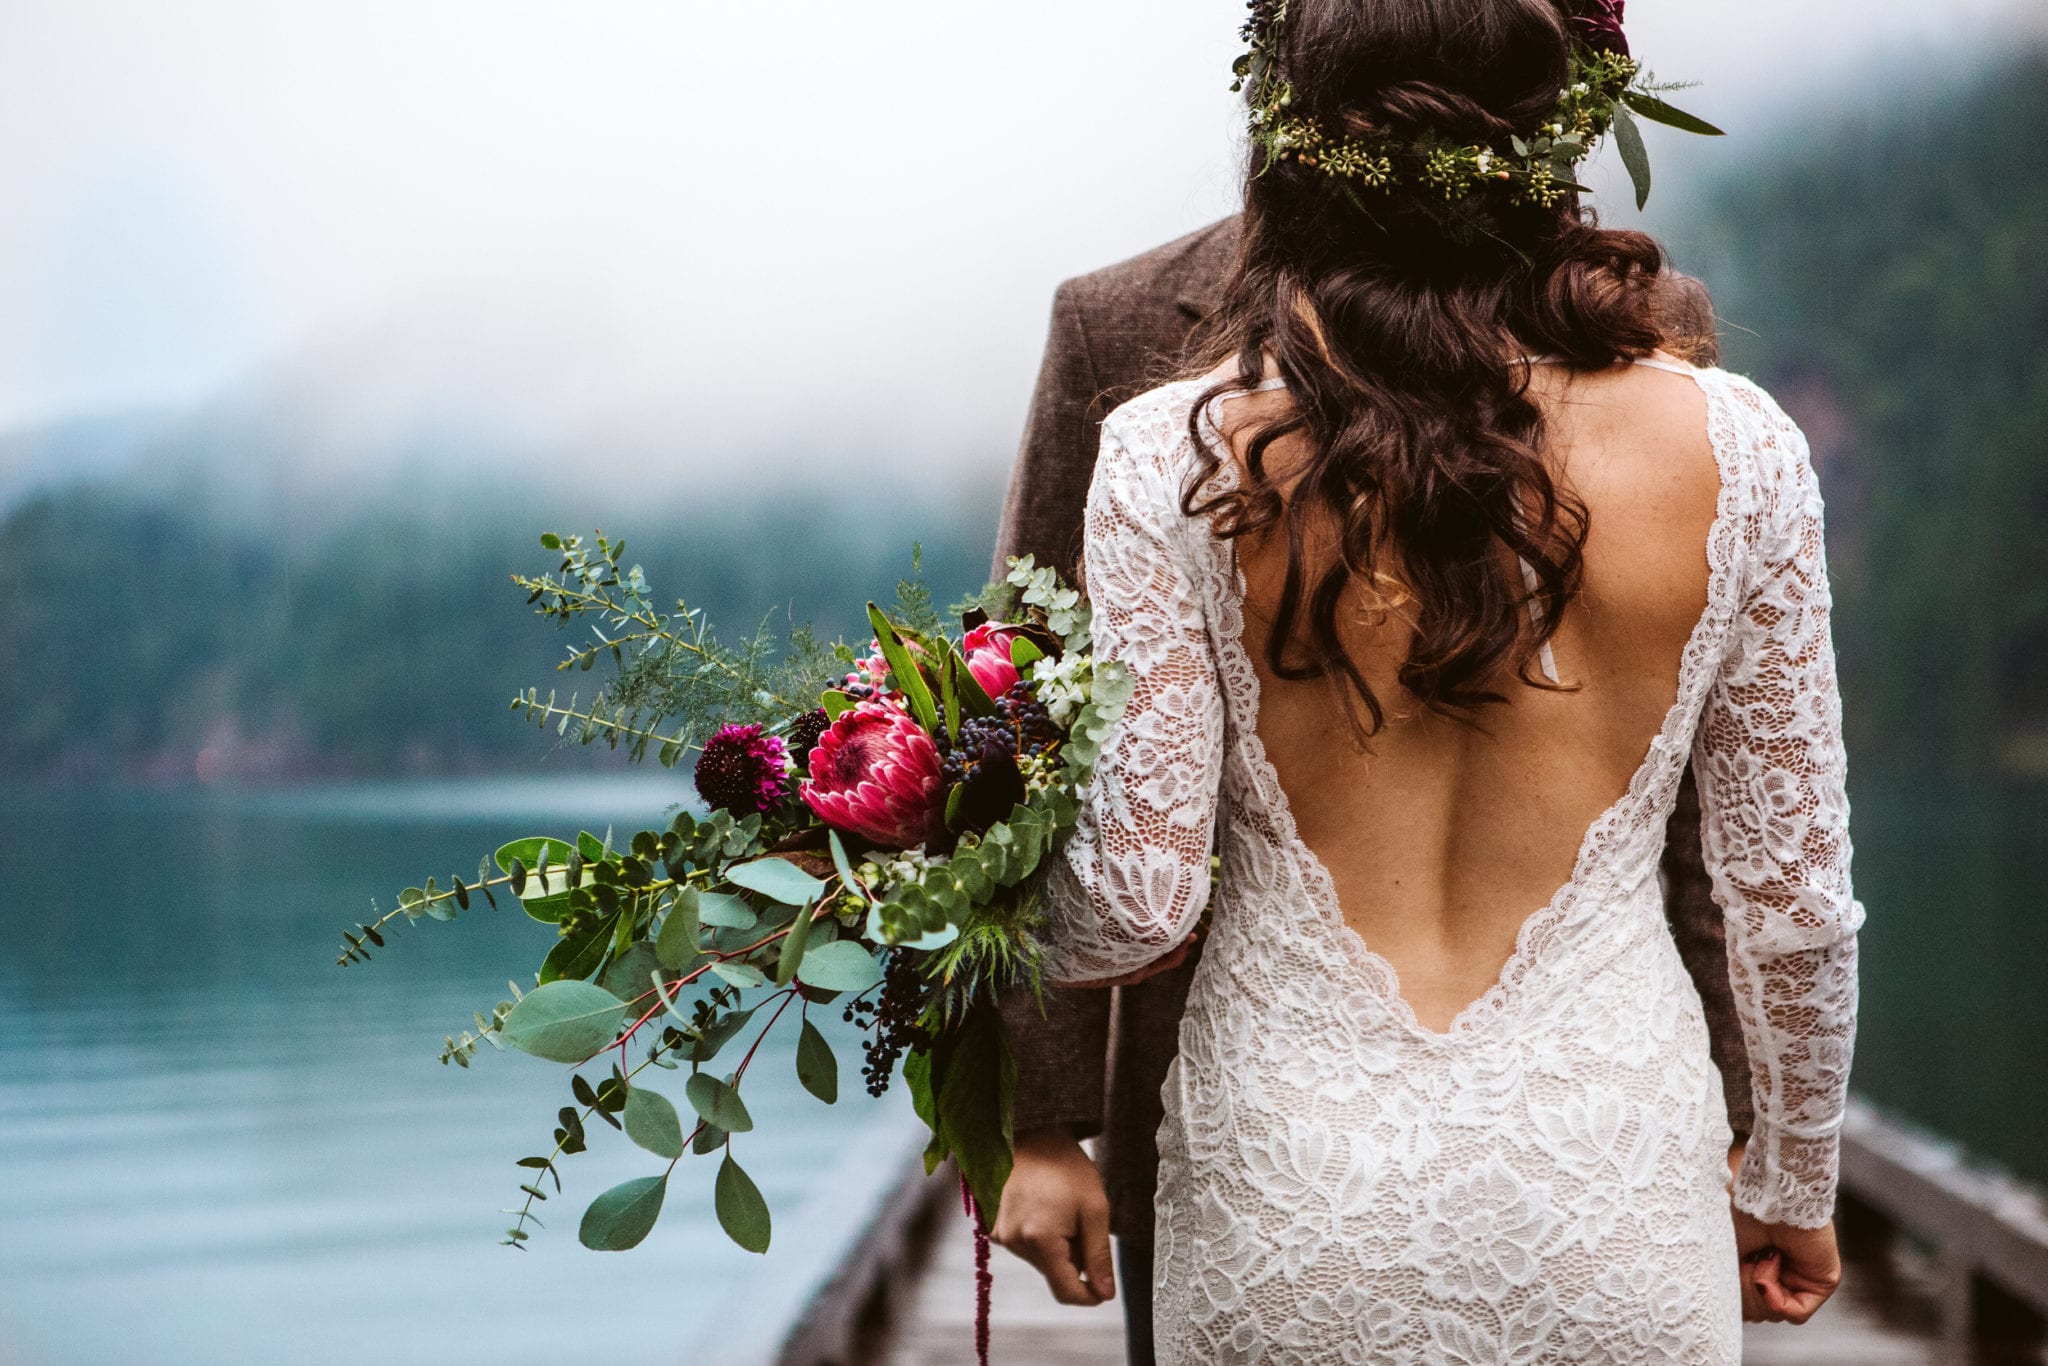 contest wedding details first place winner kate gansneder gsquared weddings seattle wedding photographer snohomish wedding lake crescent olympic national park elopement